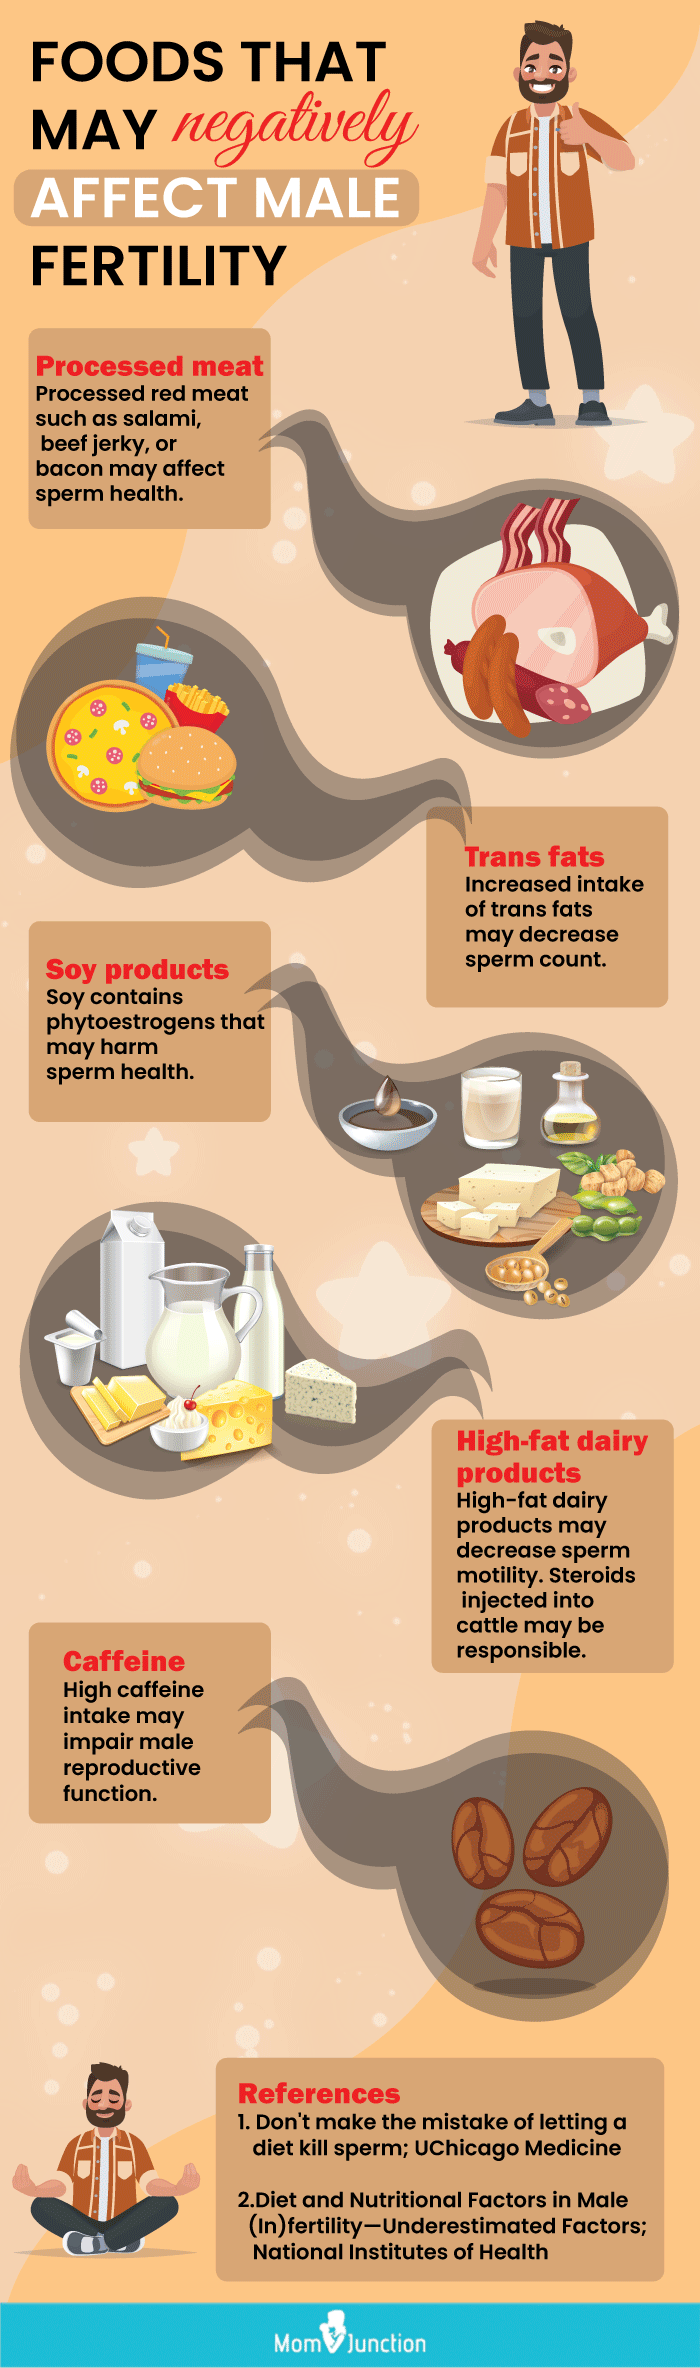 components Of diet that may affect fertility (infographic)